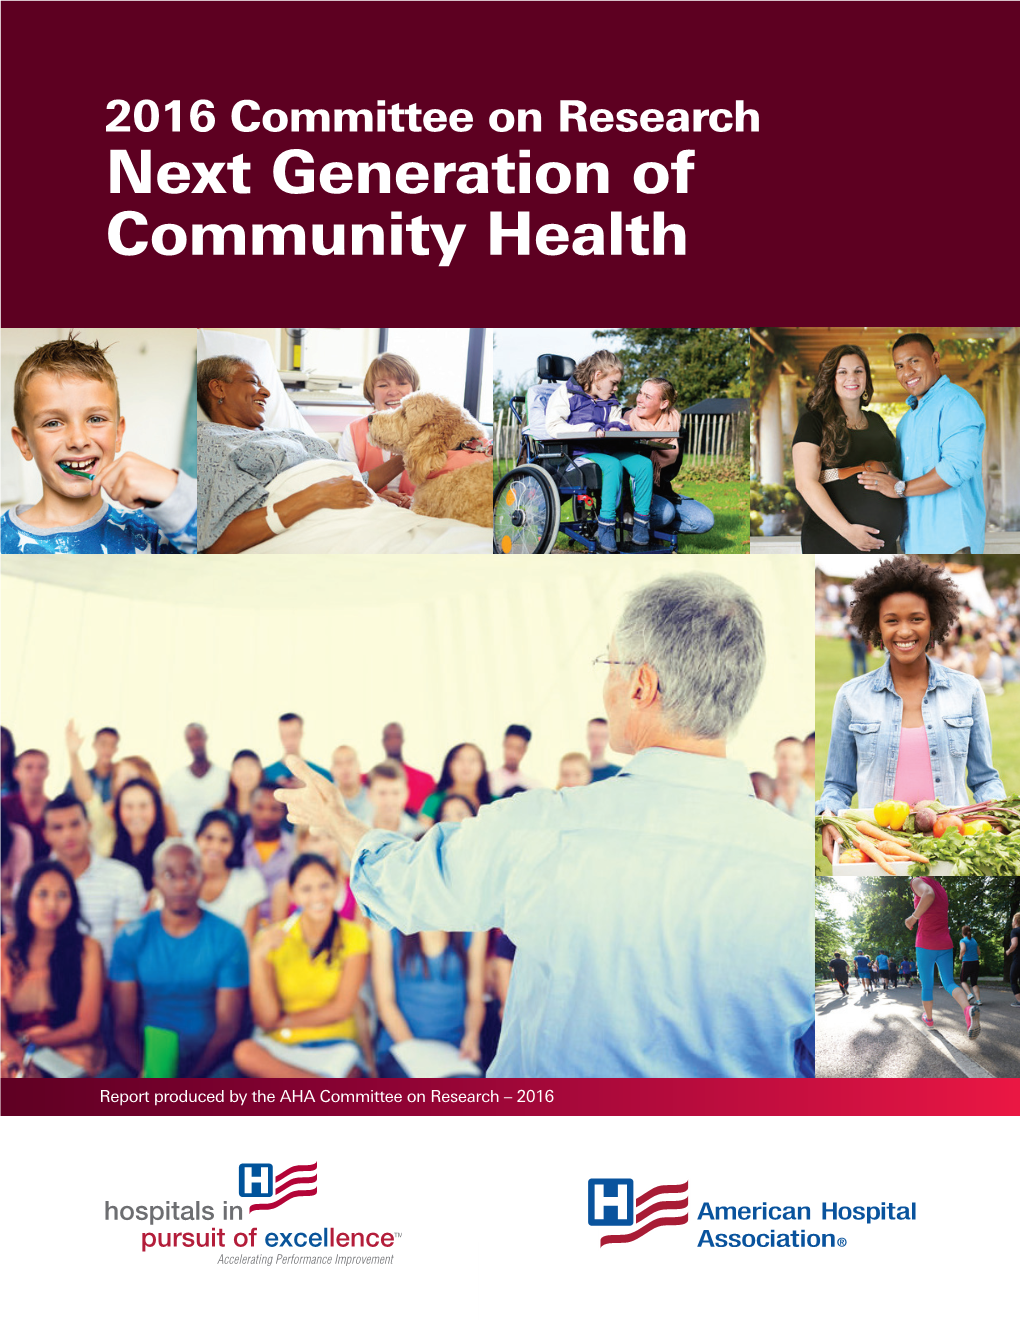 2016 Committee on Research Next Generation of Community Health